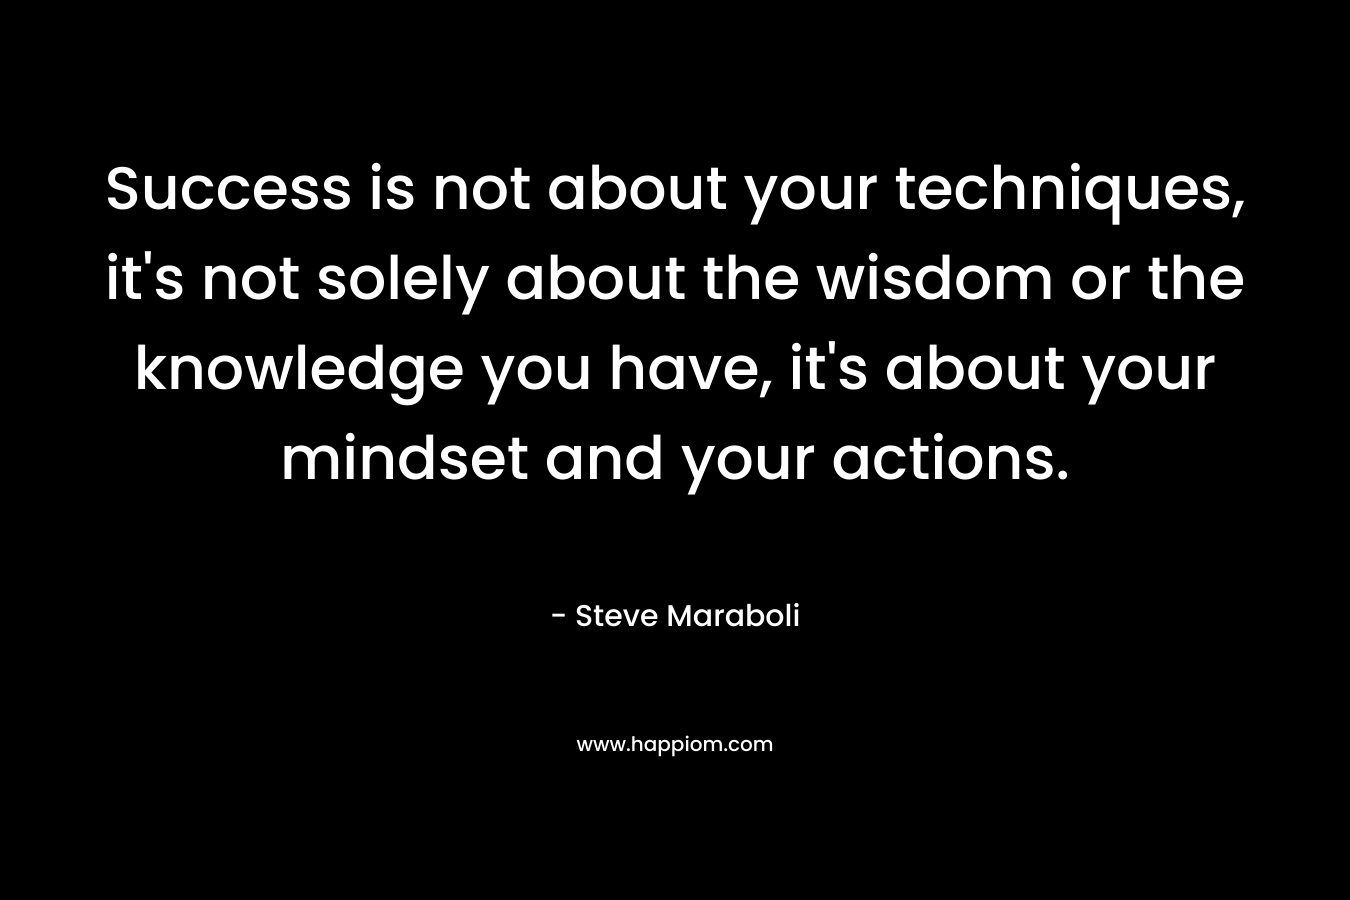 Success is not about your techniques, it's not solely about the wisdom or the knowledge you have, it's about your mindset and your actions.